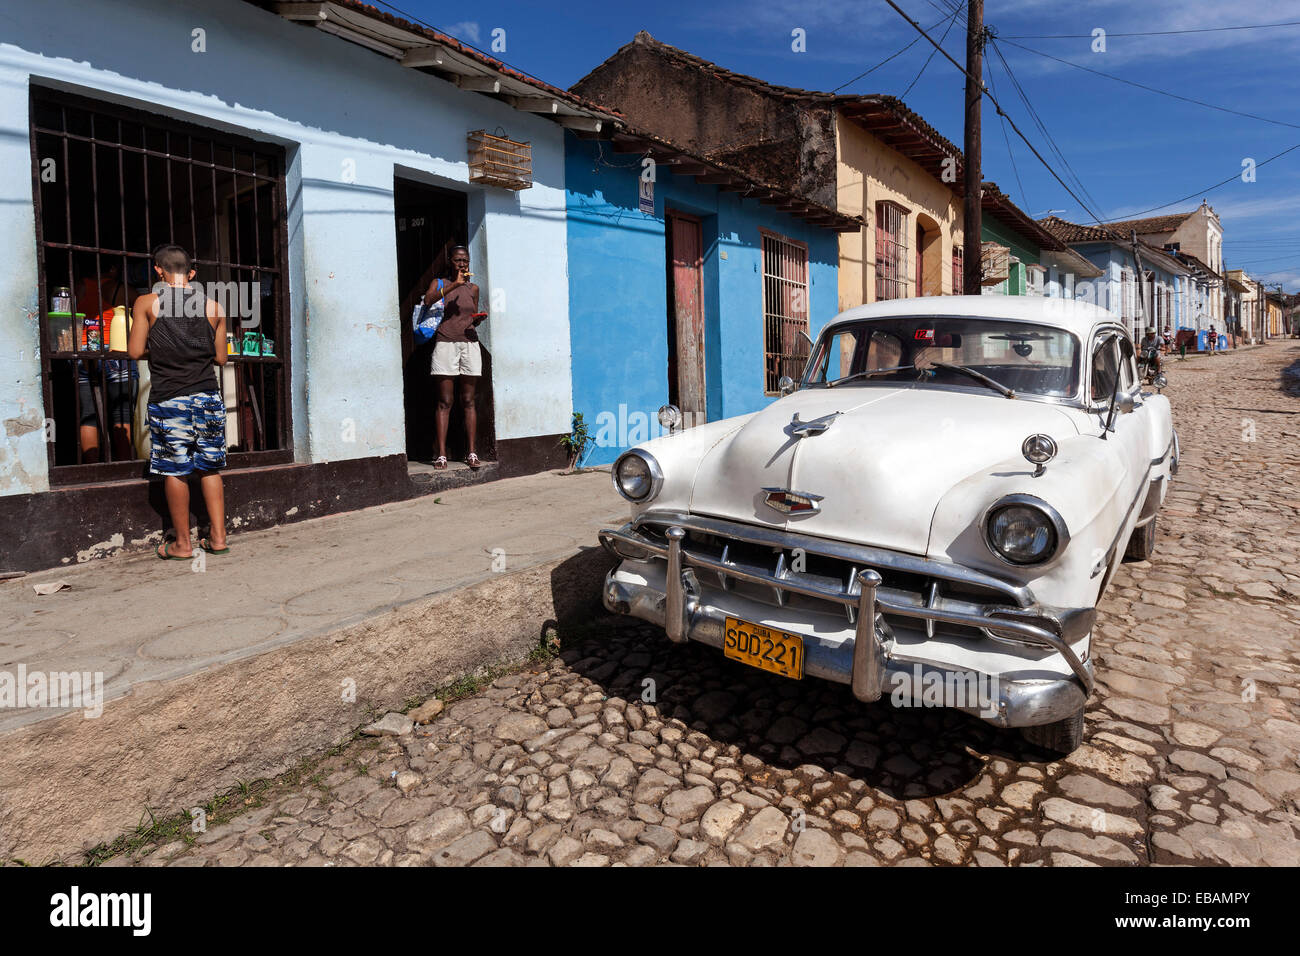 Vintage Chevrolet from the 1940s, Trinidad, Cuba Stock Photo